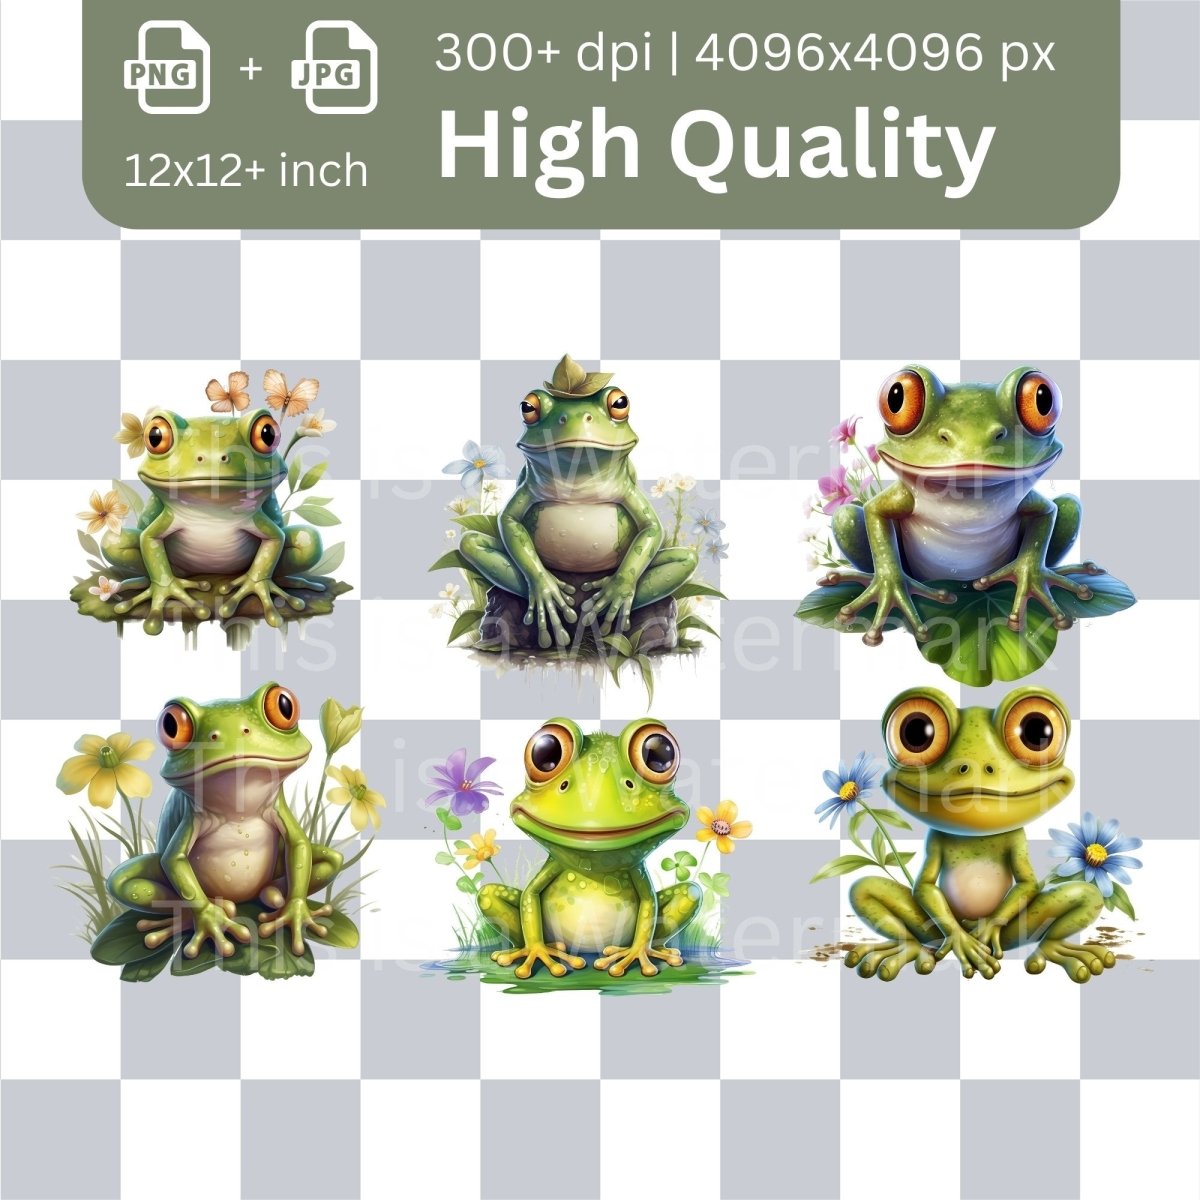 Cute Frogs Megabundle 42+42 High Quality PNGs Frog in different Scenes Clipart Nursery Card Making Clip Art Digital Paper Craft Graphic - Everything Pixel